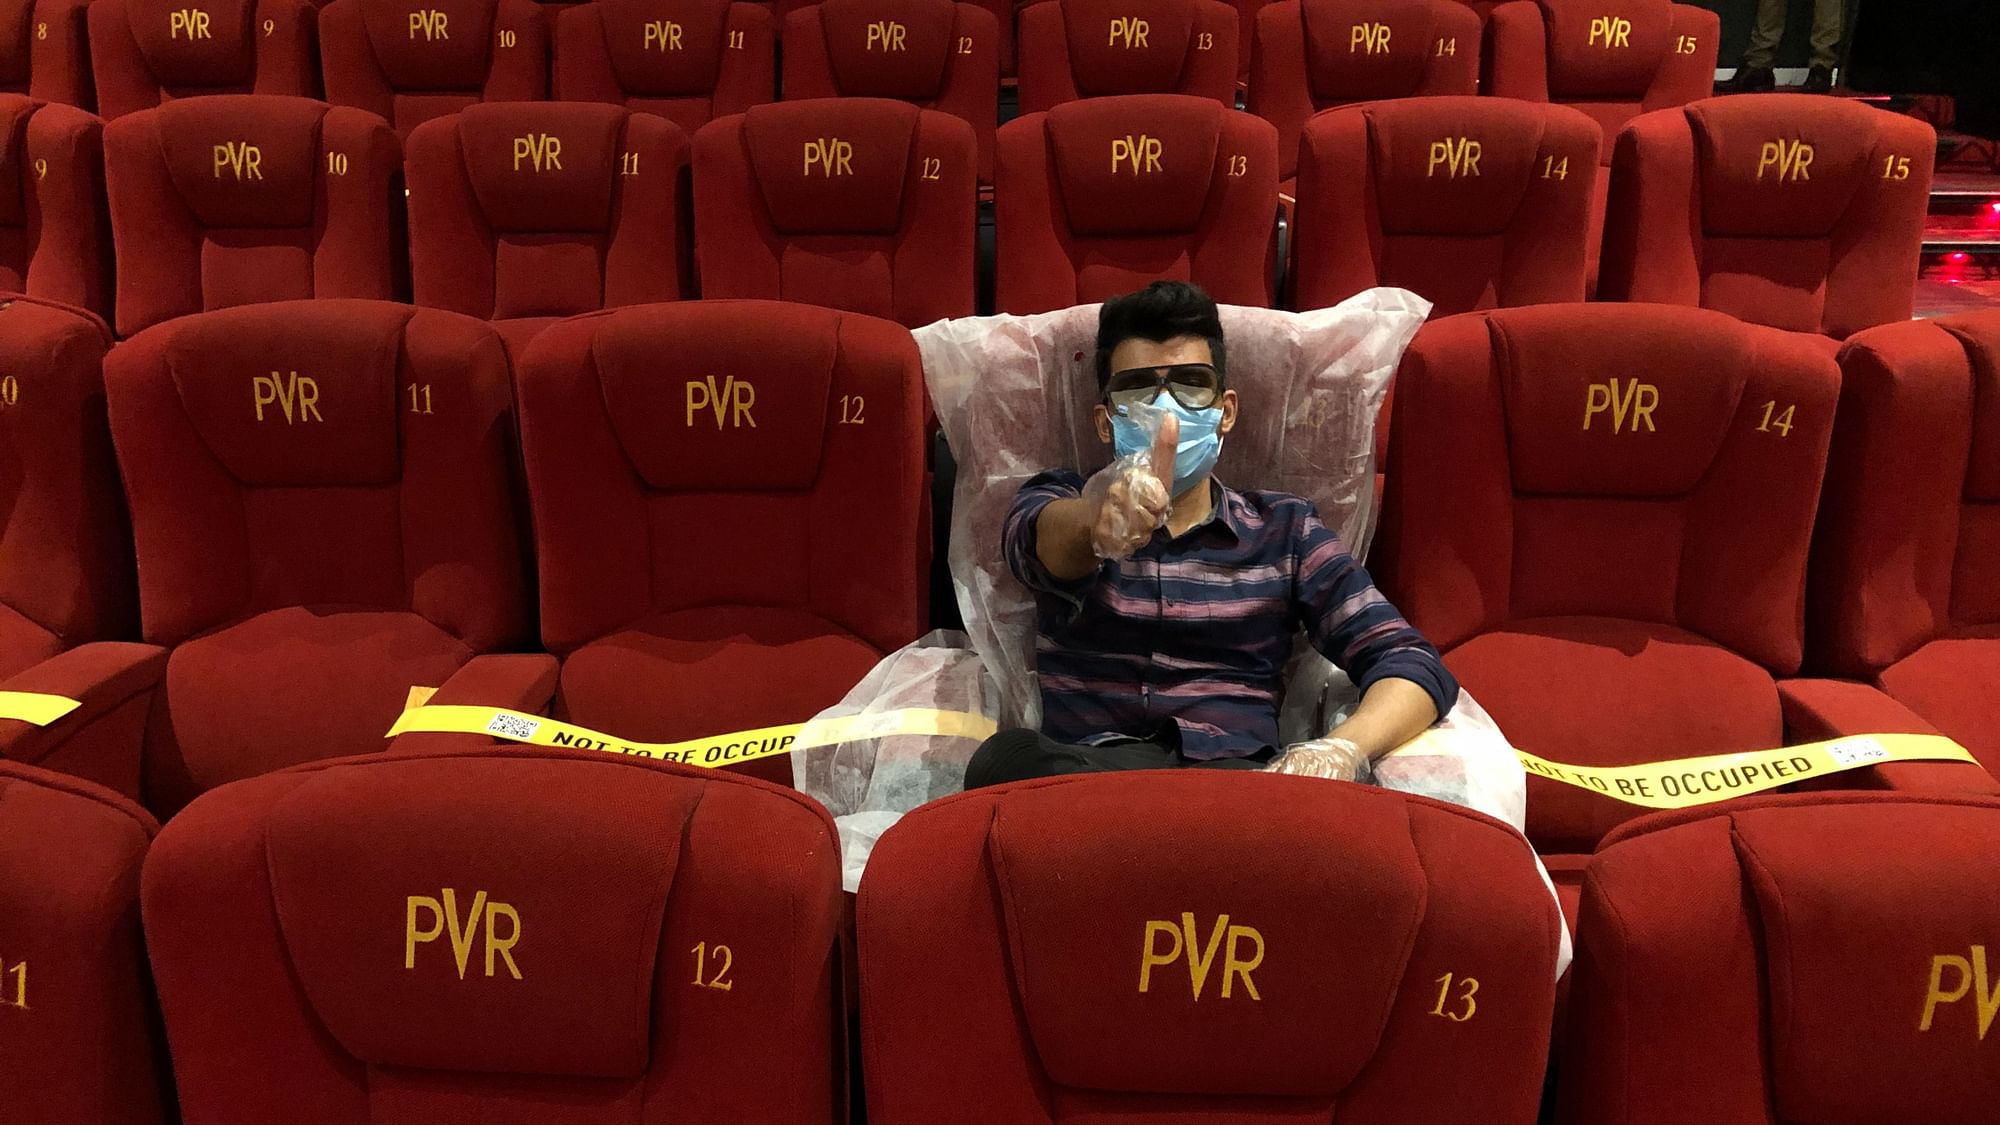 From paperless ticketing to gaps between seats, here’s how PVR is planning to raise the curtain on big screens.